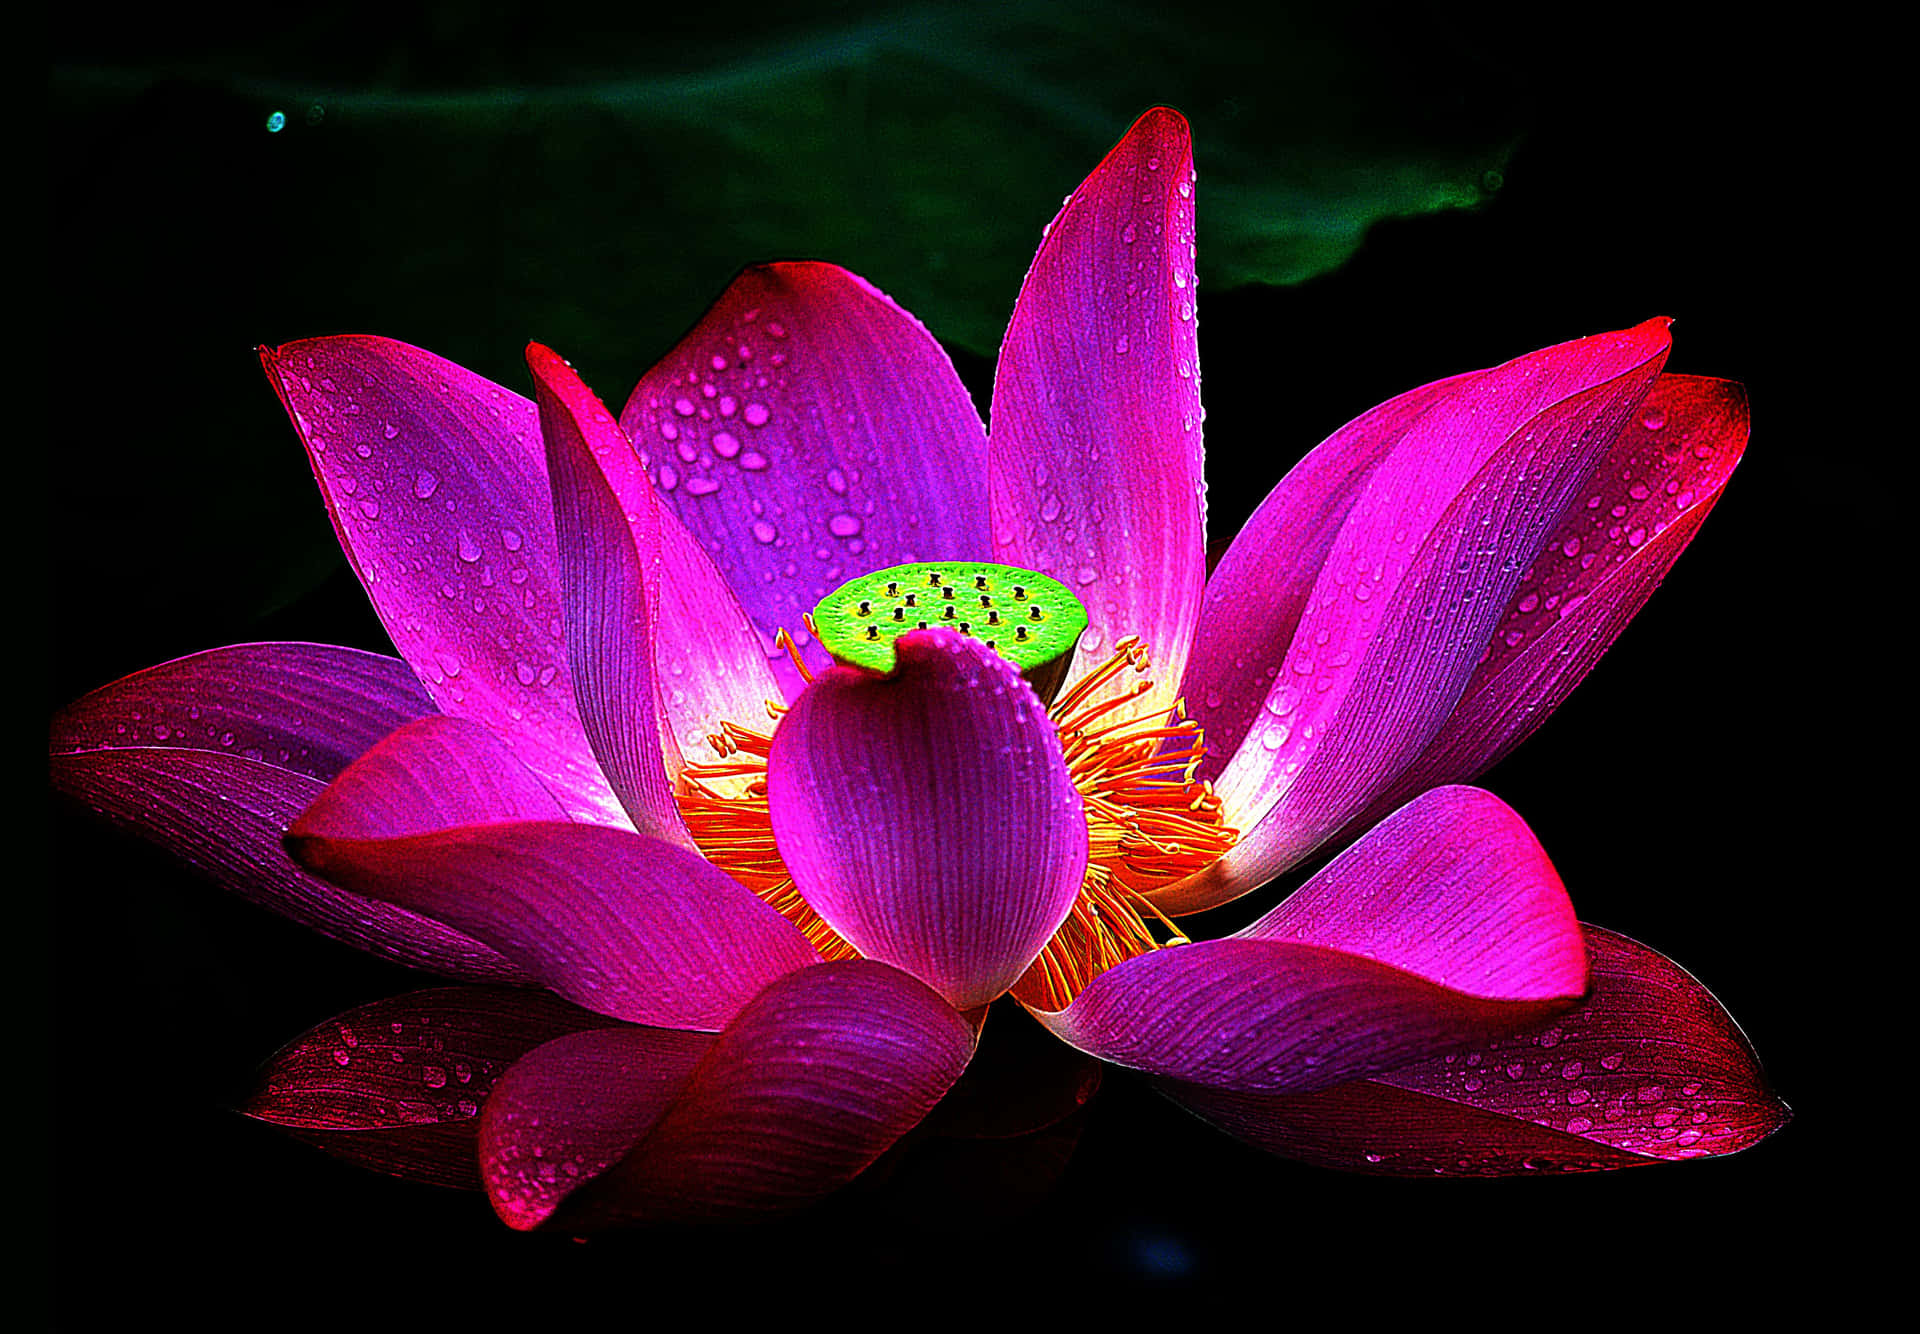 A tranquil scene of a pink lotus flower in the sunshine